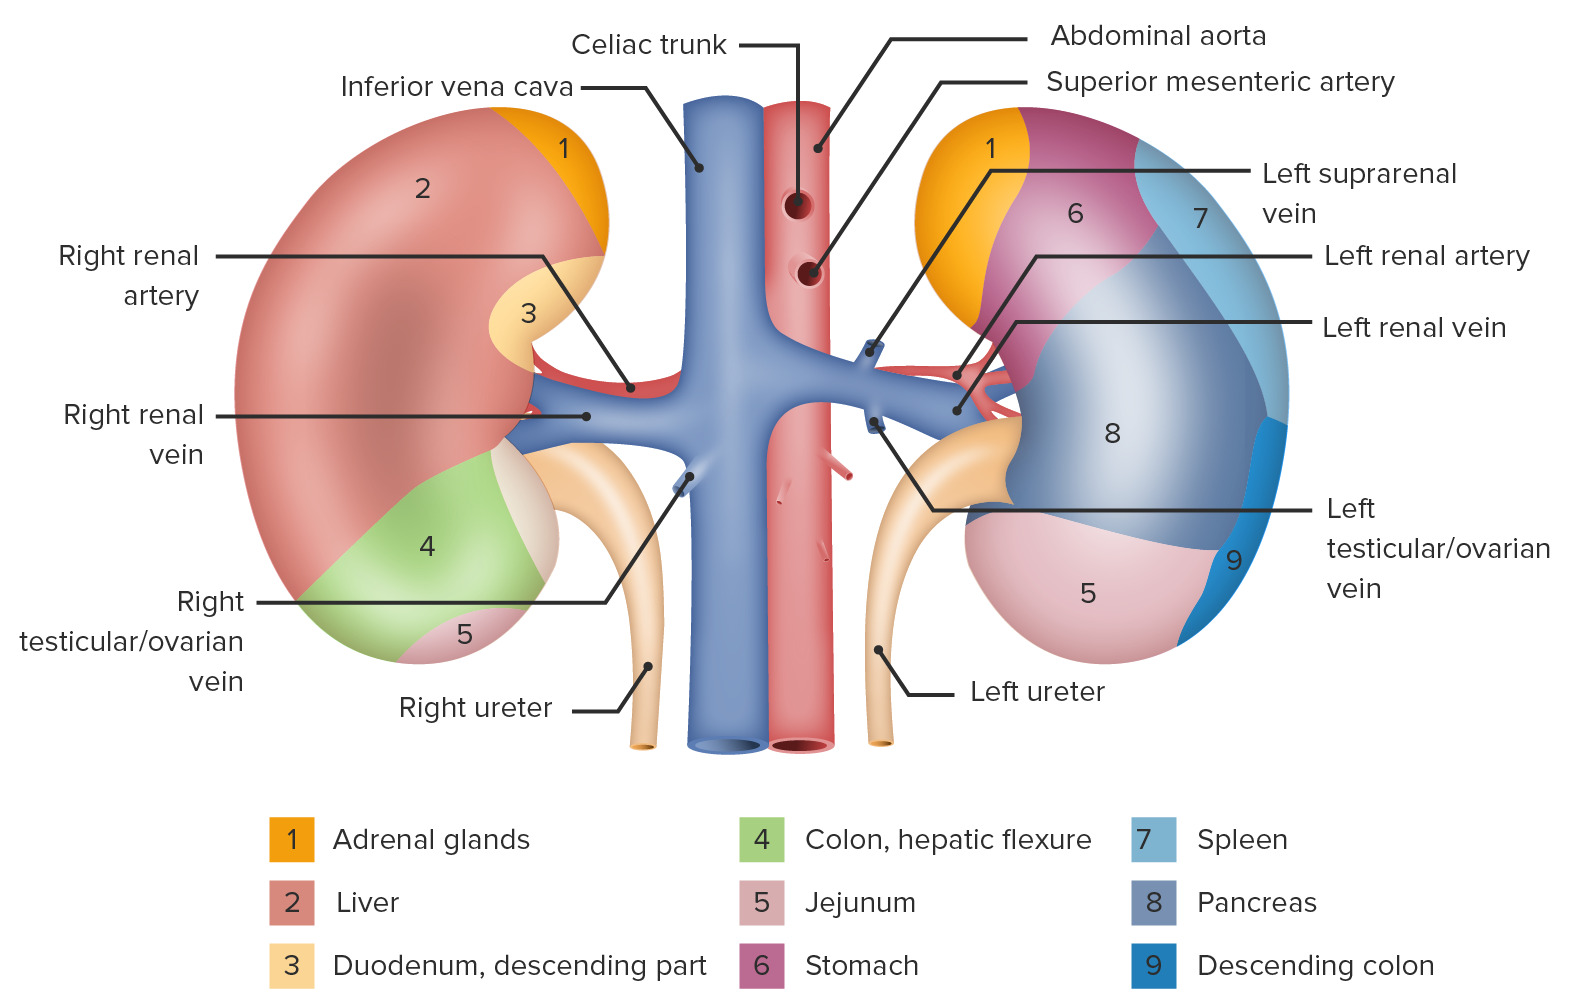 Kidneys with shadings showing their anatomical relations